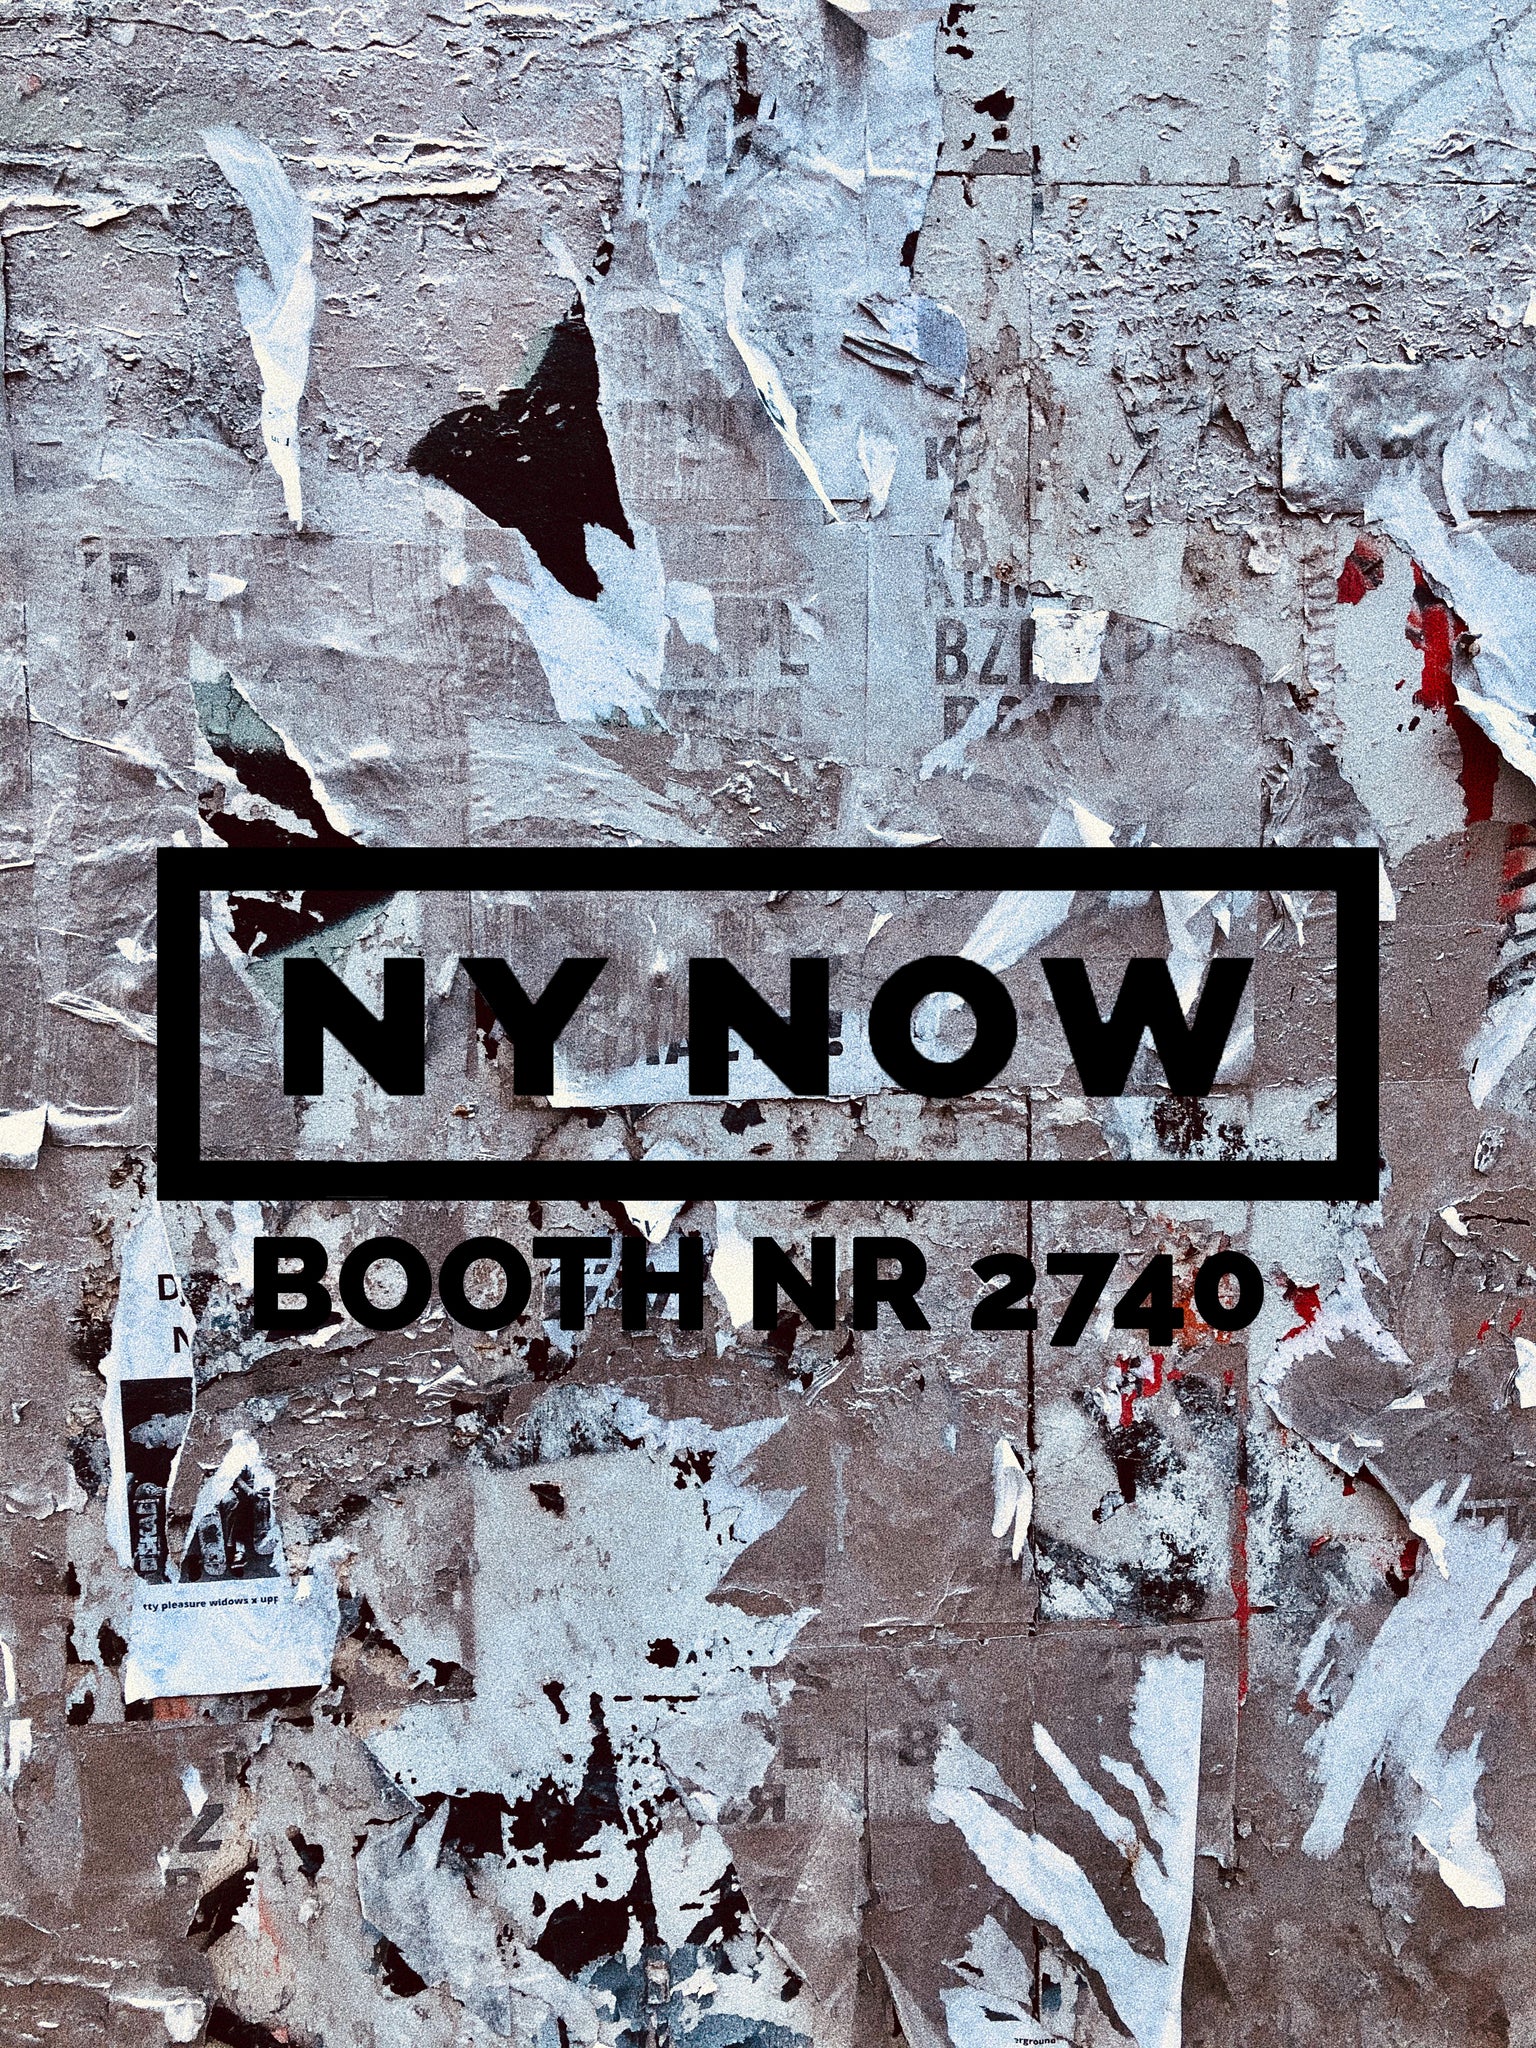 TOOCHE at NY NOW 2020 trade show in New York